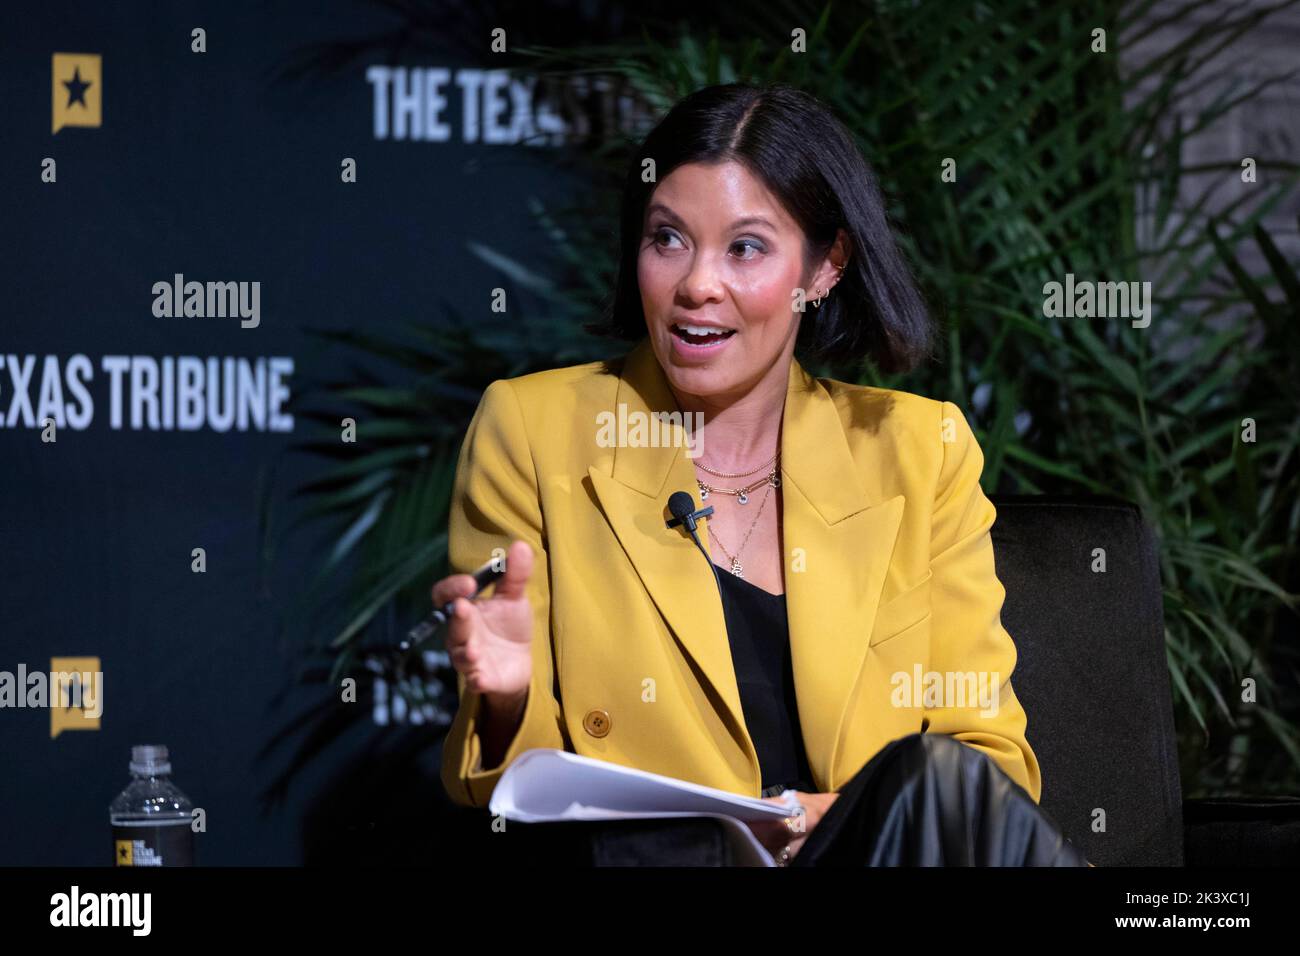 Austin Texas USA, September 24 2022: Alex Wagner, host of "Alex Wagner Tonight" on MSNBC,  asks a question during an interview session at the annual Texas Tribune Festival in downtown Austin. ©Bob Daemmrich Stock Photo